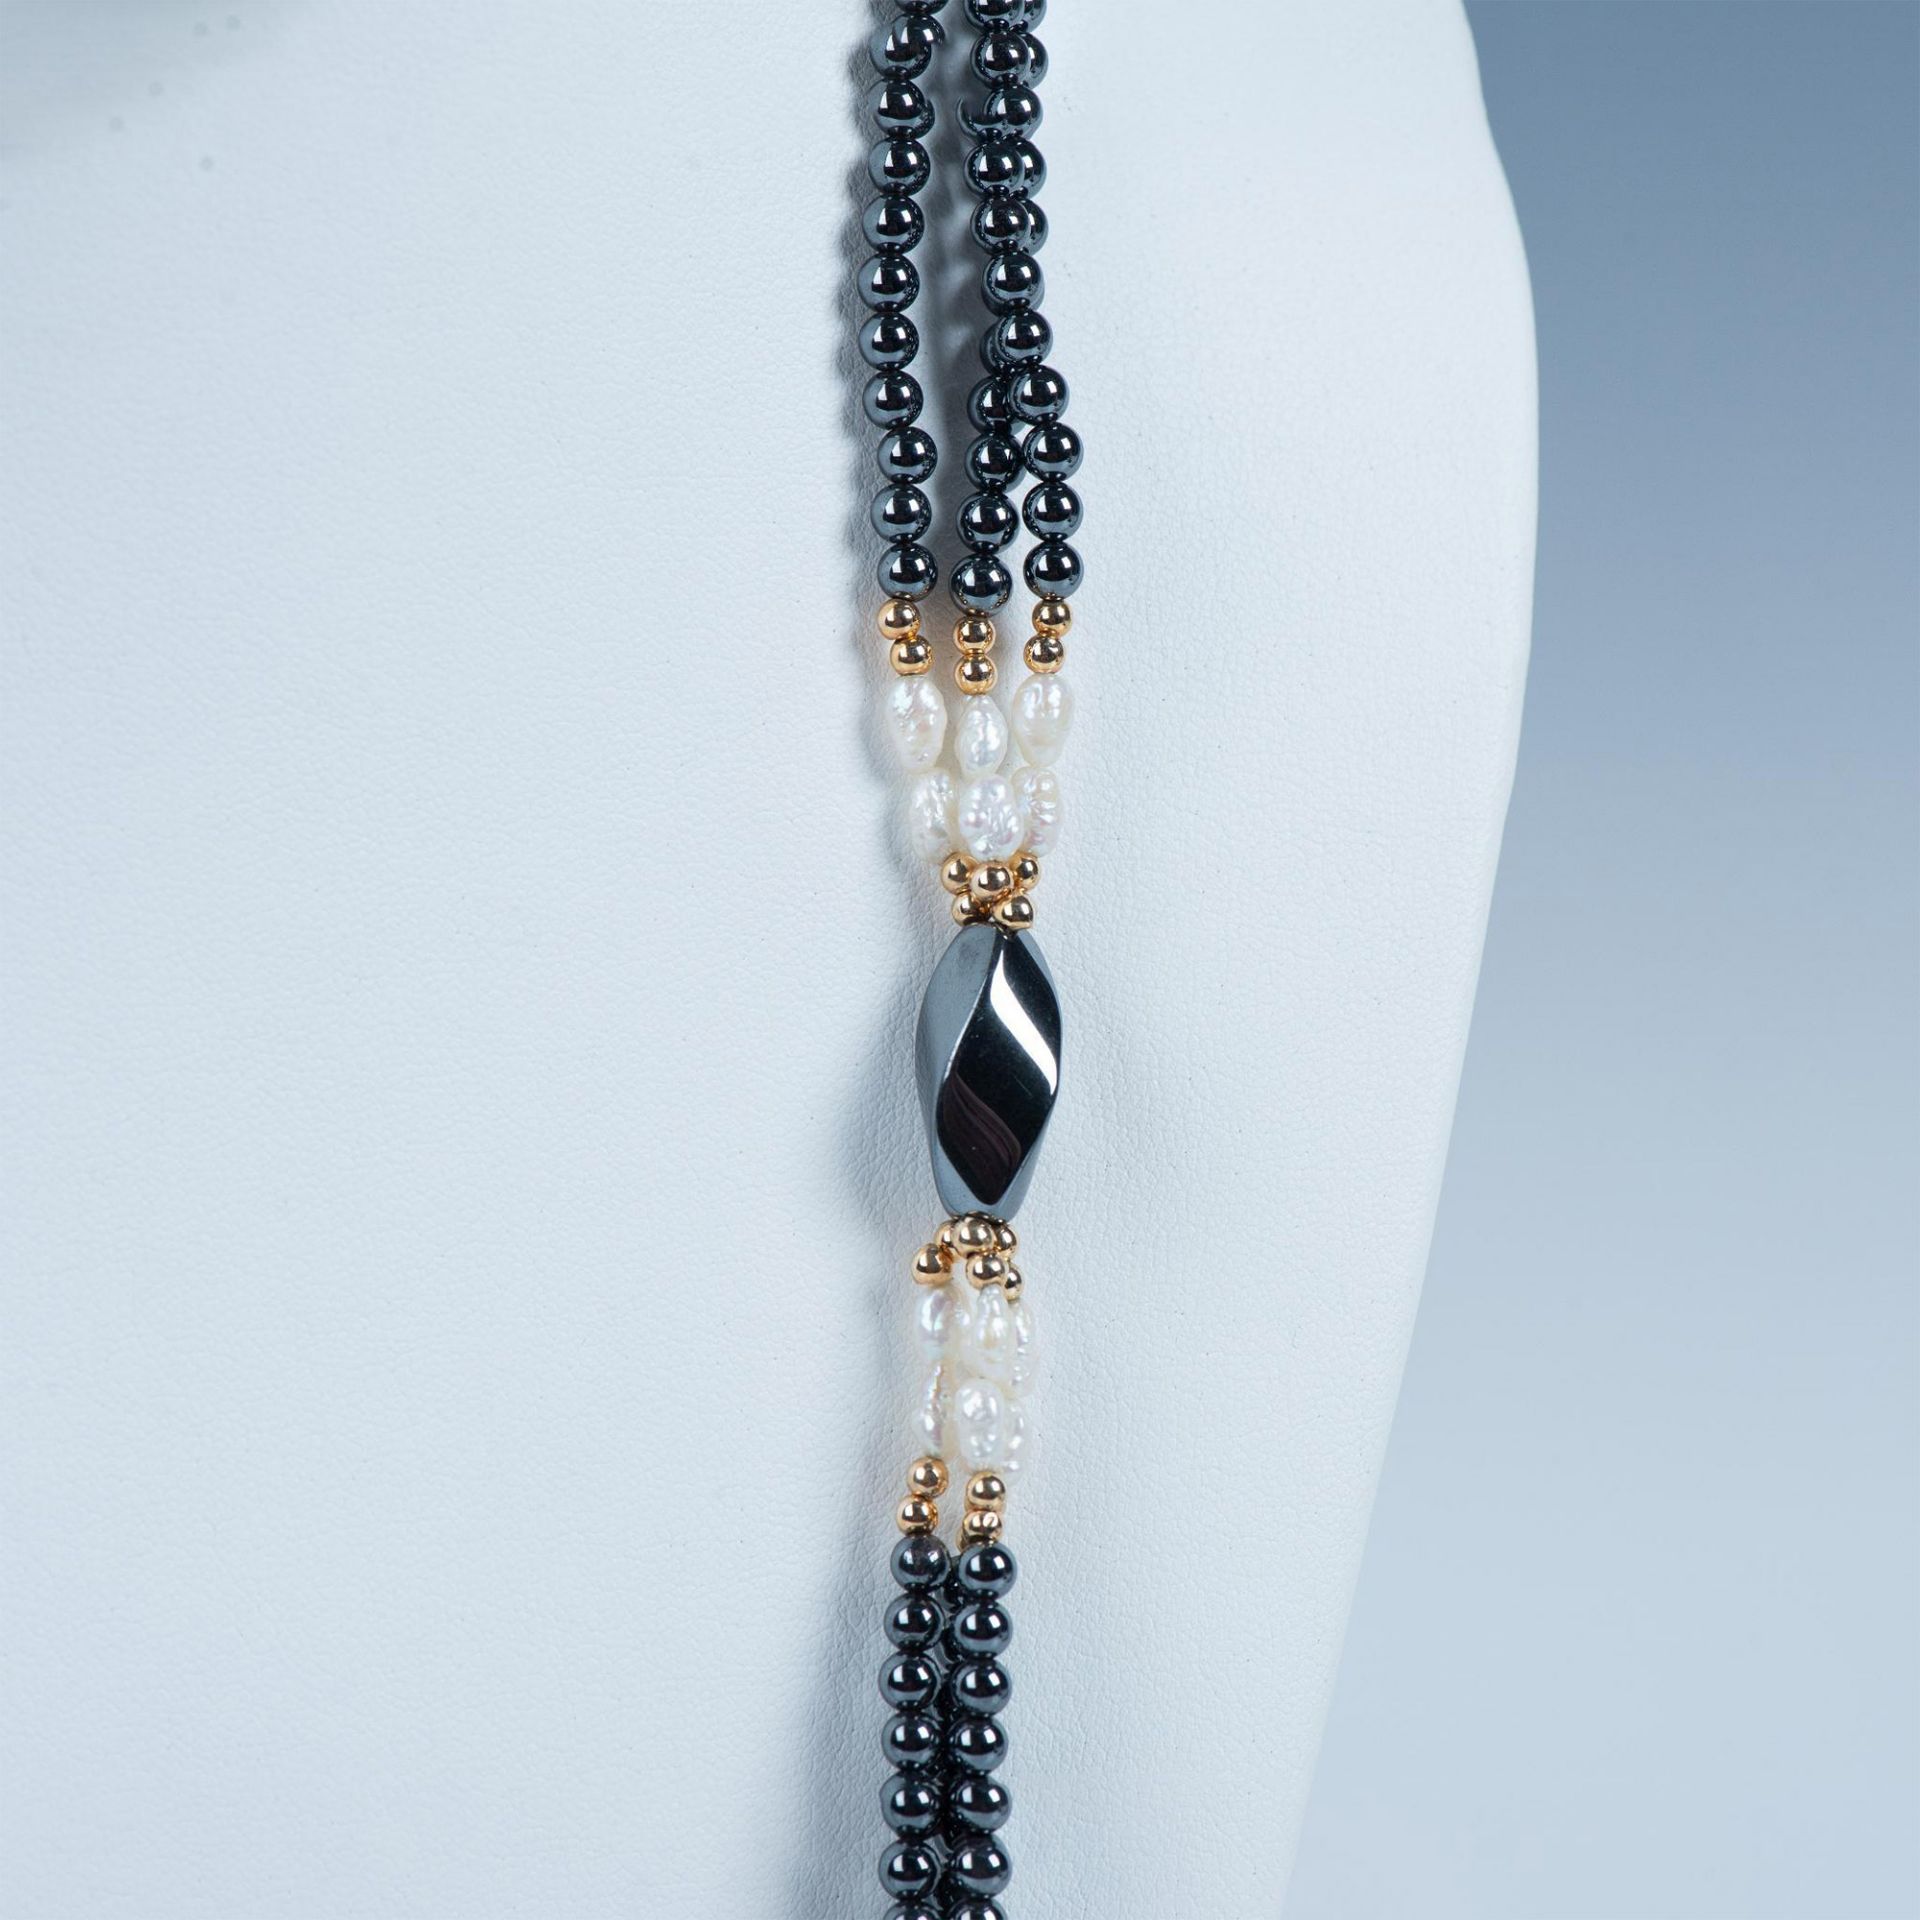 Black Onyx & Fresh Water Pearl Necklace - Image 6 of 7